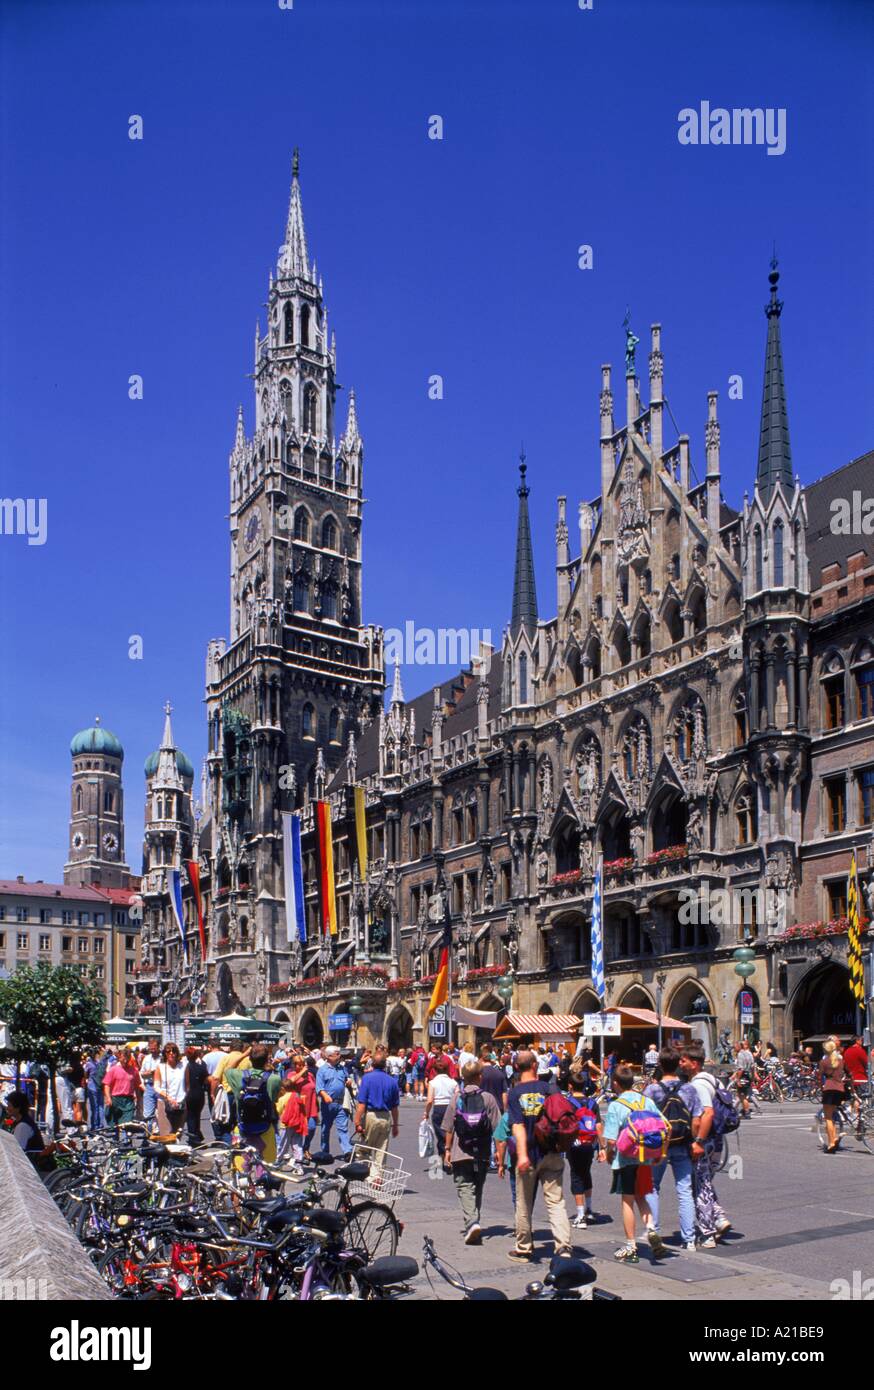 Tourists on the Marienplatz in front of the New Town Hall in the city of Munich Bavaria Germany H P Merten Stock Photo